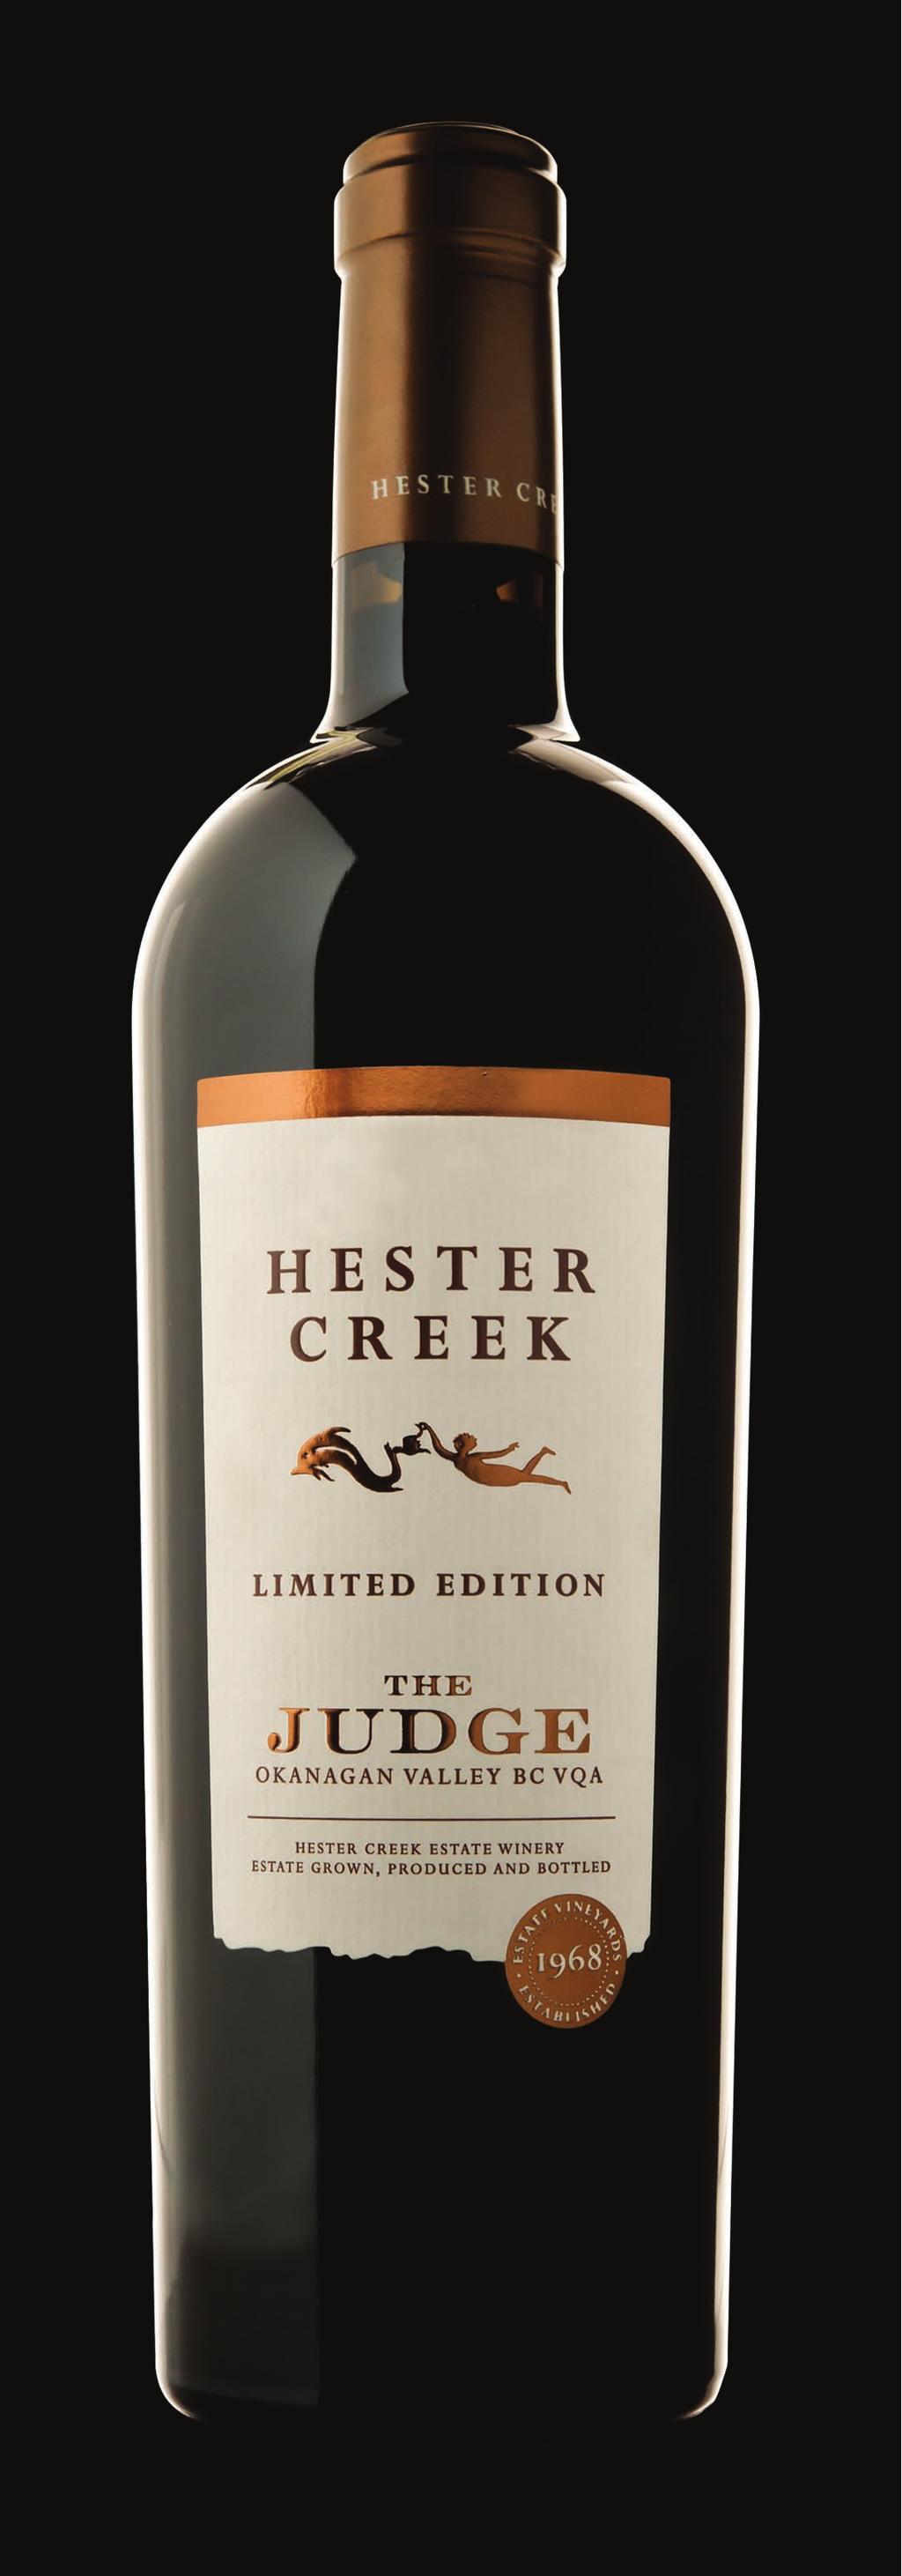 The Judge Vintage: 2011 Price 750ml: $45.00 (BC) Price 1.5 L: $125, in a wooden box (BC) Availability 750ml: Winery only, Bench Club Availability 1.5 L: Winery only CSPC 750ml: 133124 1.